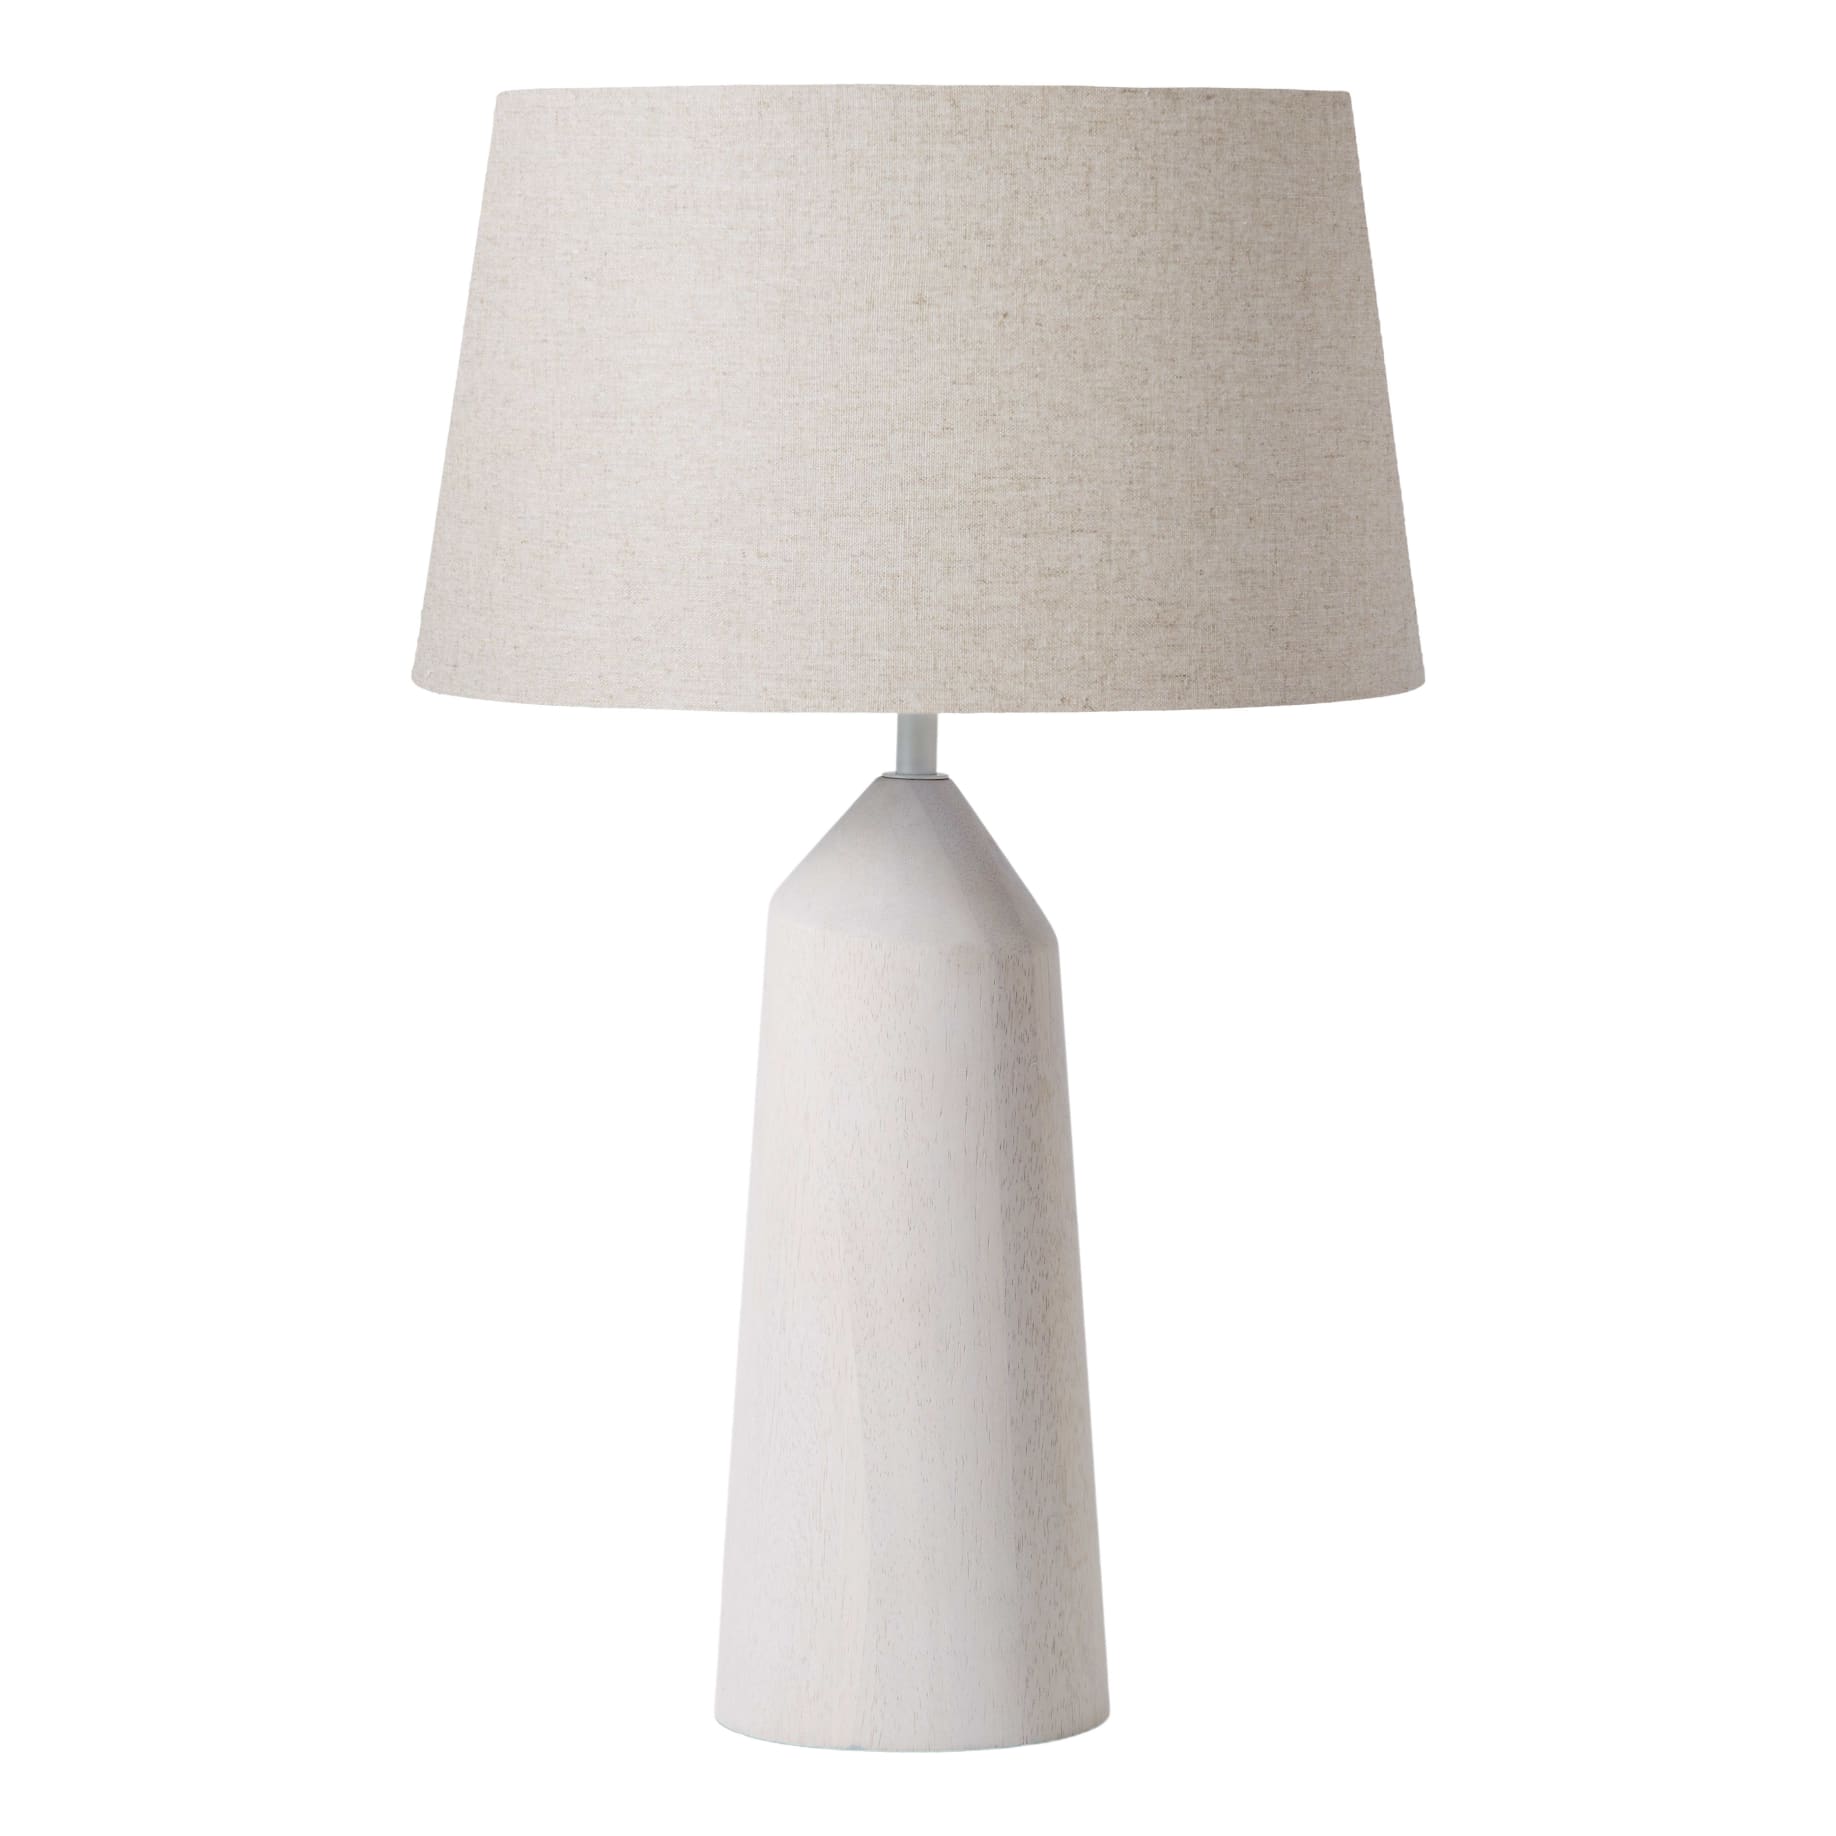 Wyoming Table Lamp 38x60cm in White